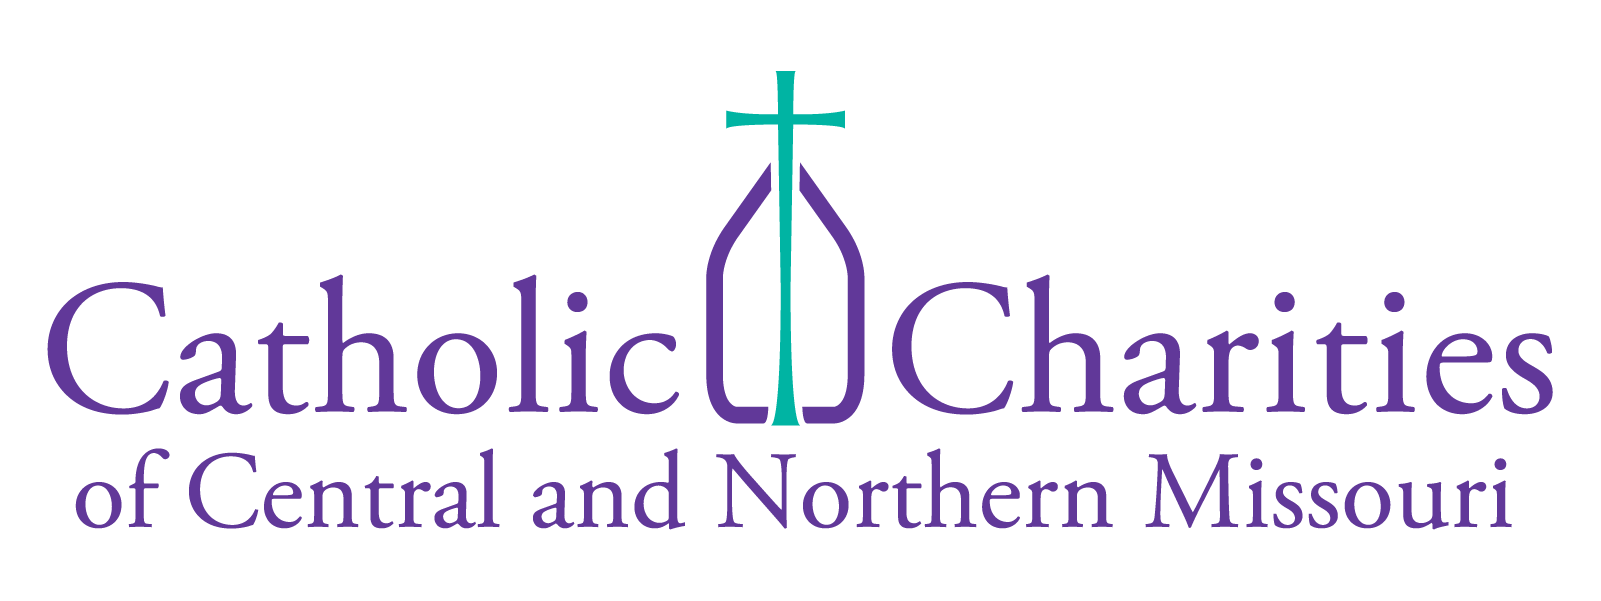 Catholic Charities of Central and Northern Missouri